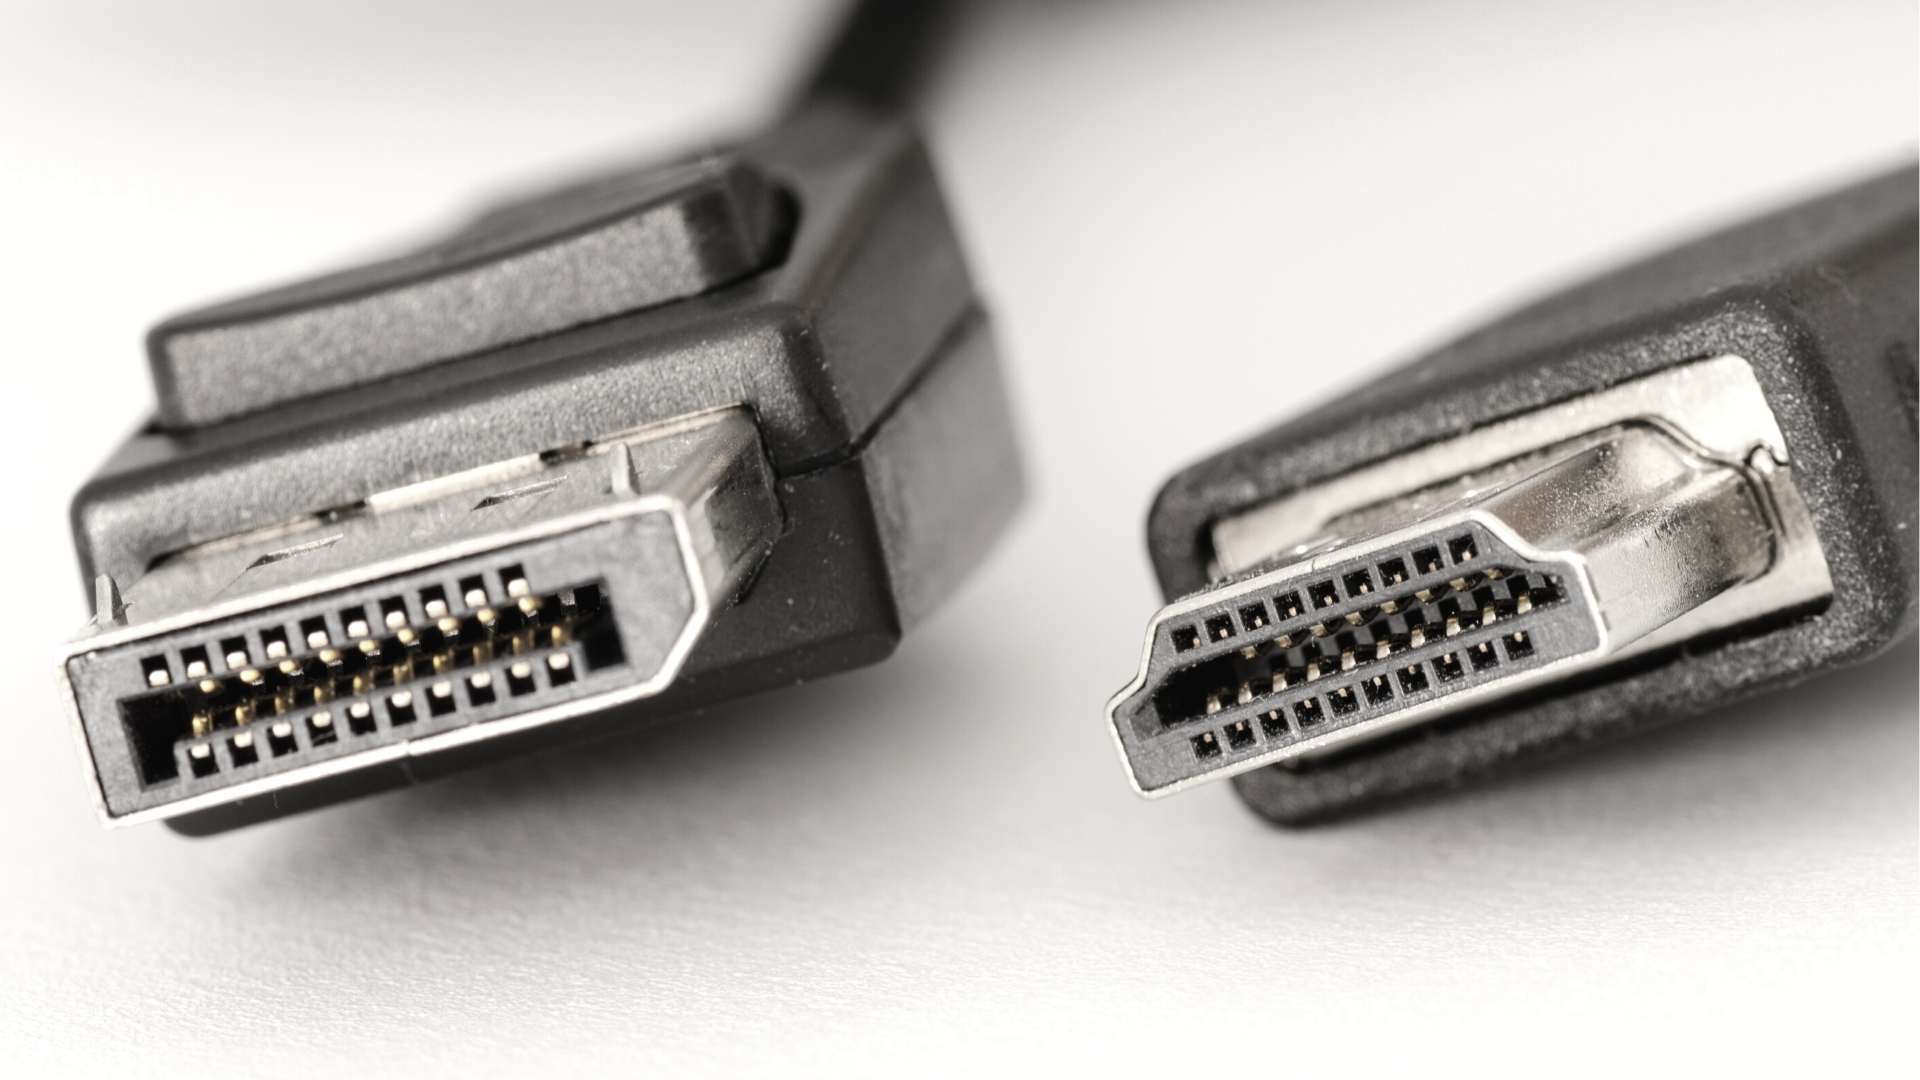 HDMI vs Which One Should You